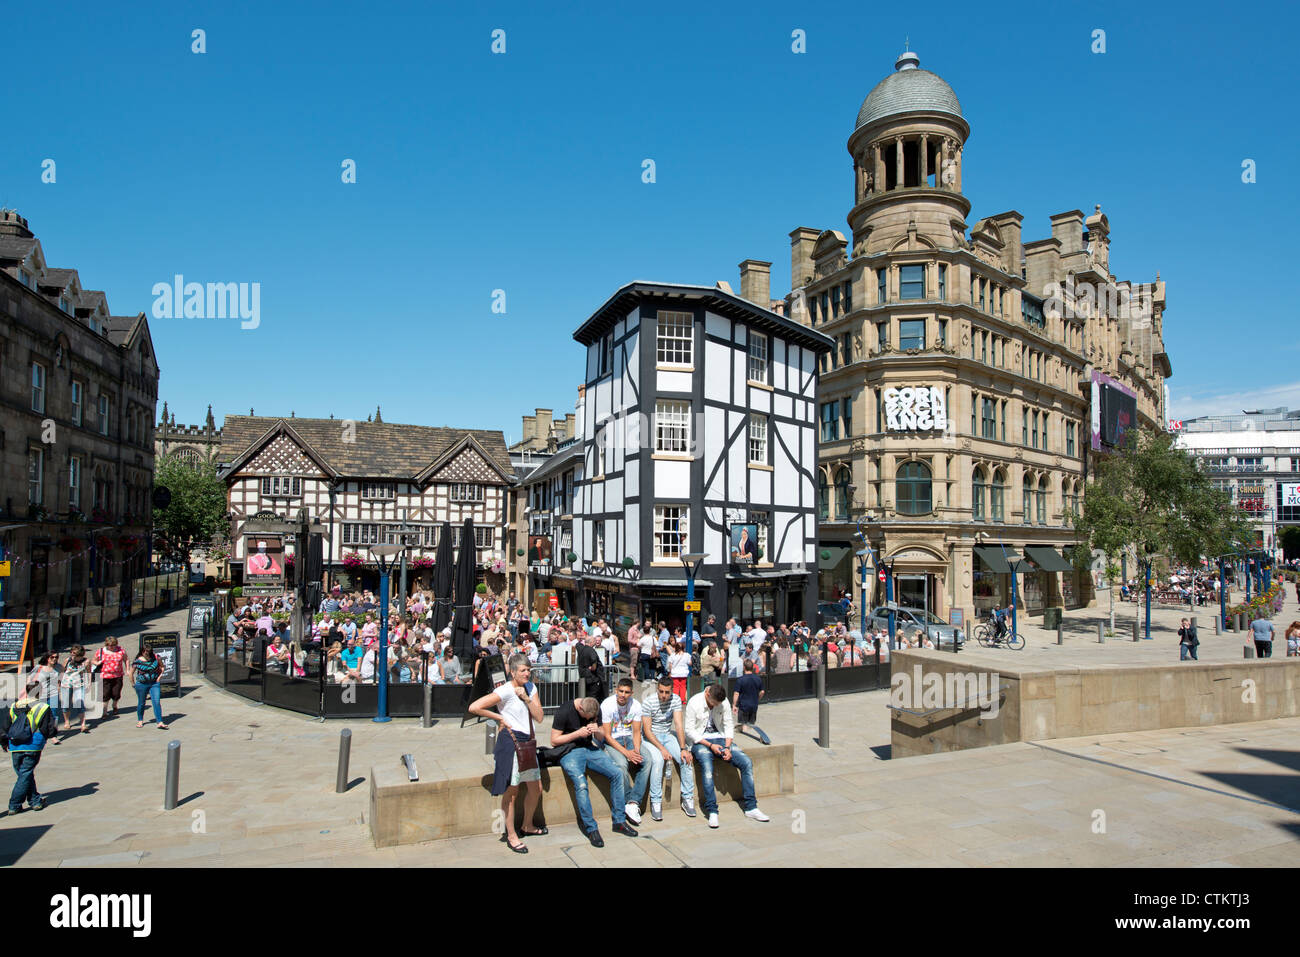 People enjoy themselves in beer garden of Sinclair's Oyster Bar near Corn Exchange Triangle in Manchester. Stock Photo